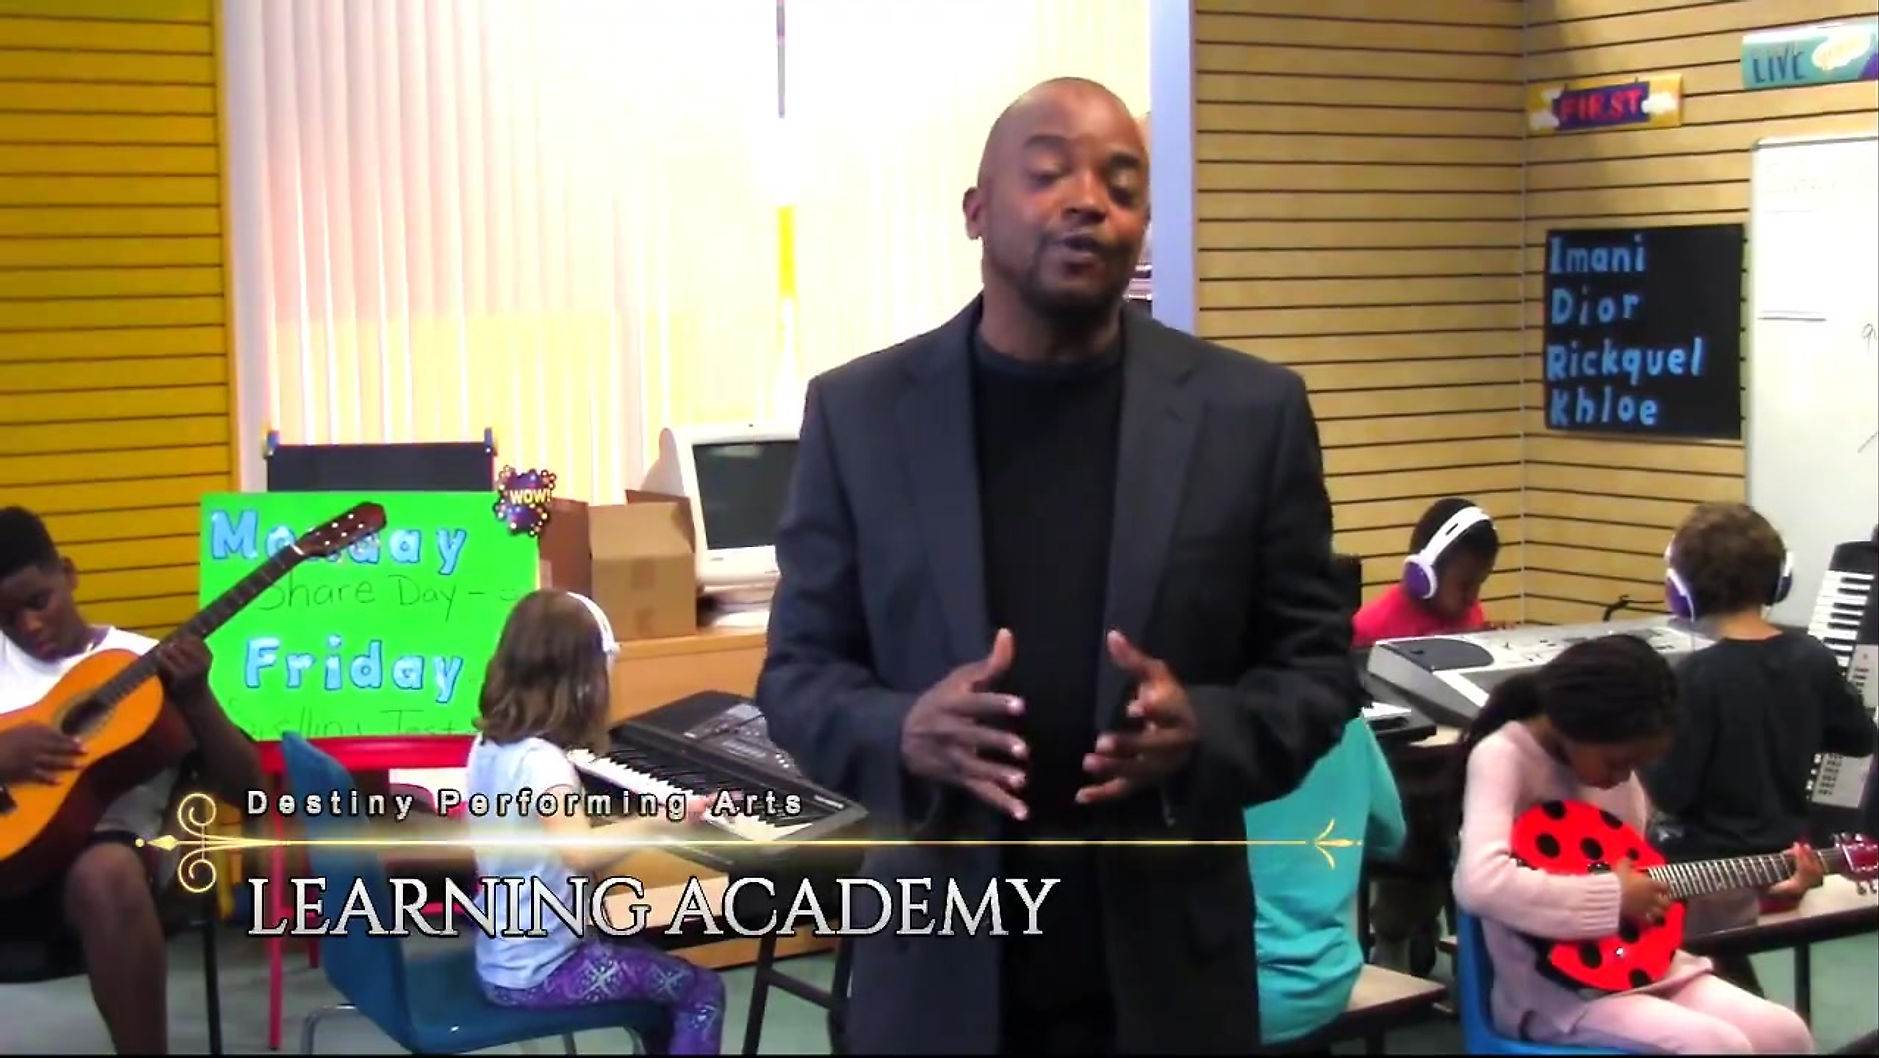 Enroll your child now to Destiny Performing Arts & Learning Academy, Your chi...